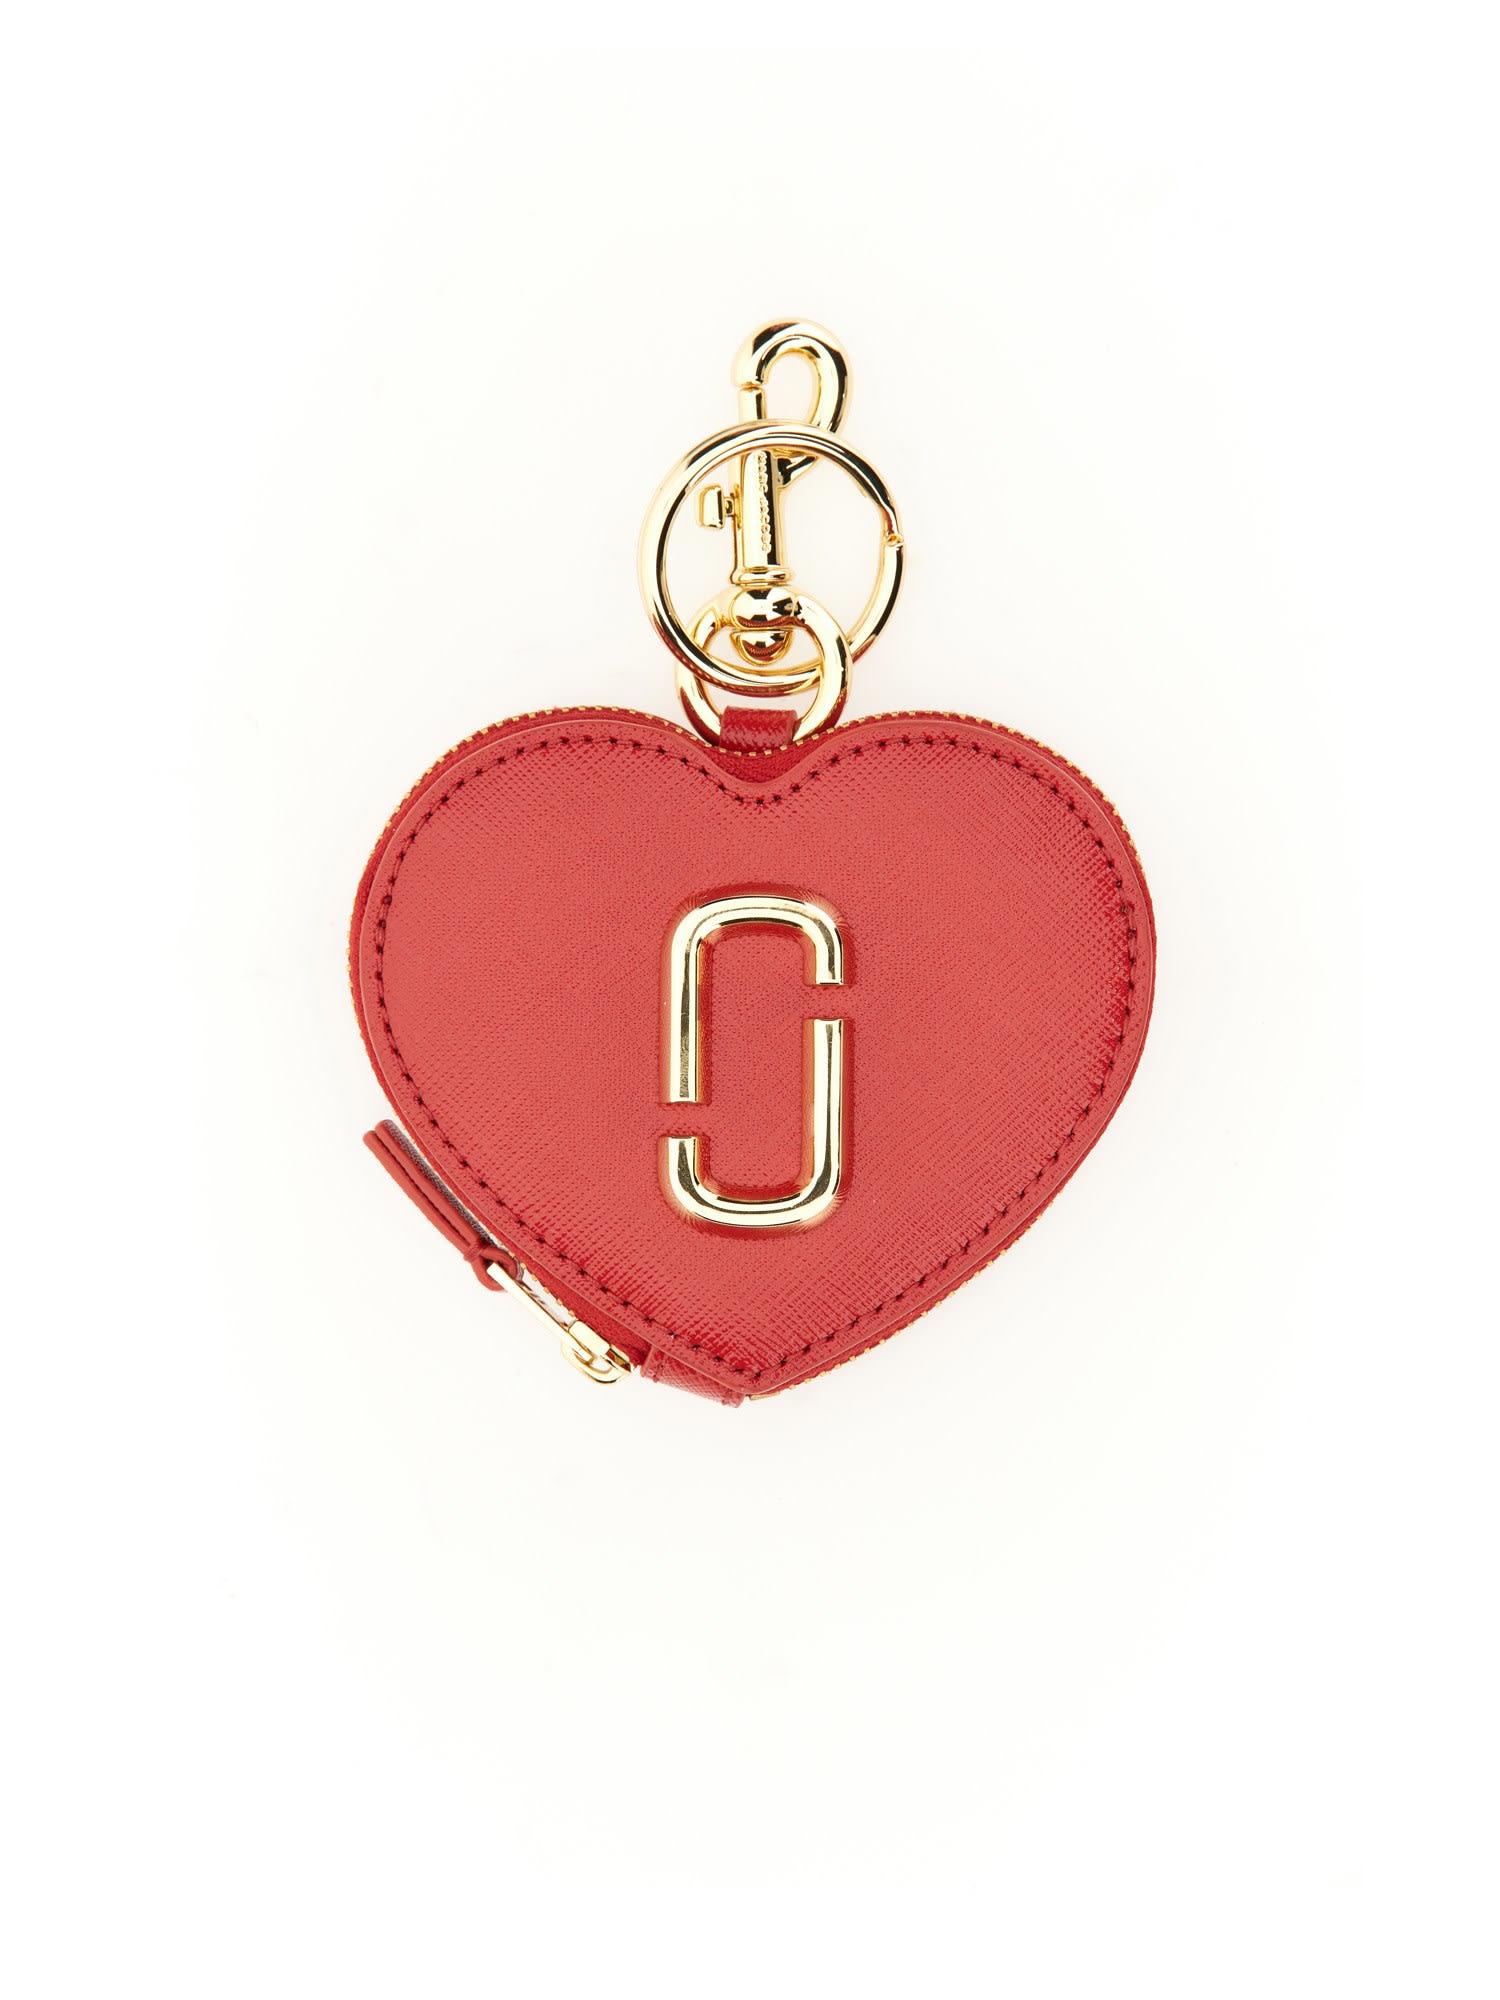 Marc Jacobs Pouch The Heart